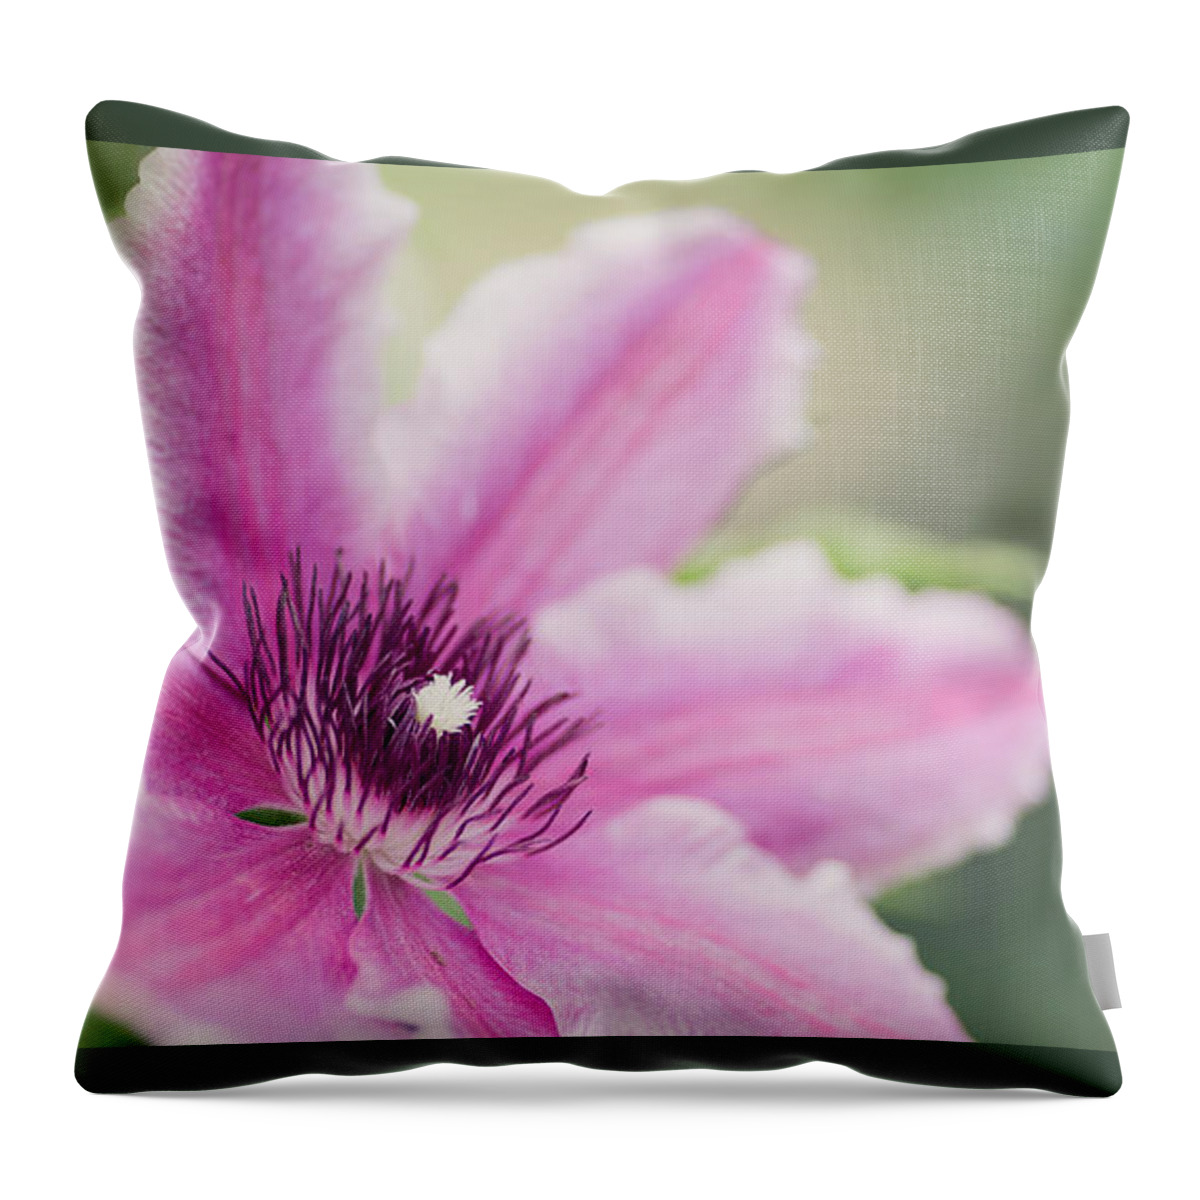 Flowers Throw Pillow featuring the photograph Pink Clematis by Rebecca Cozart